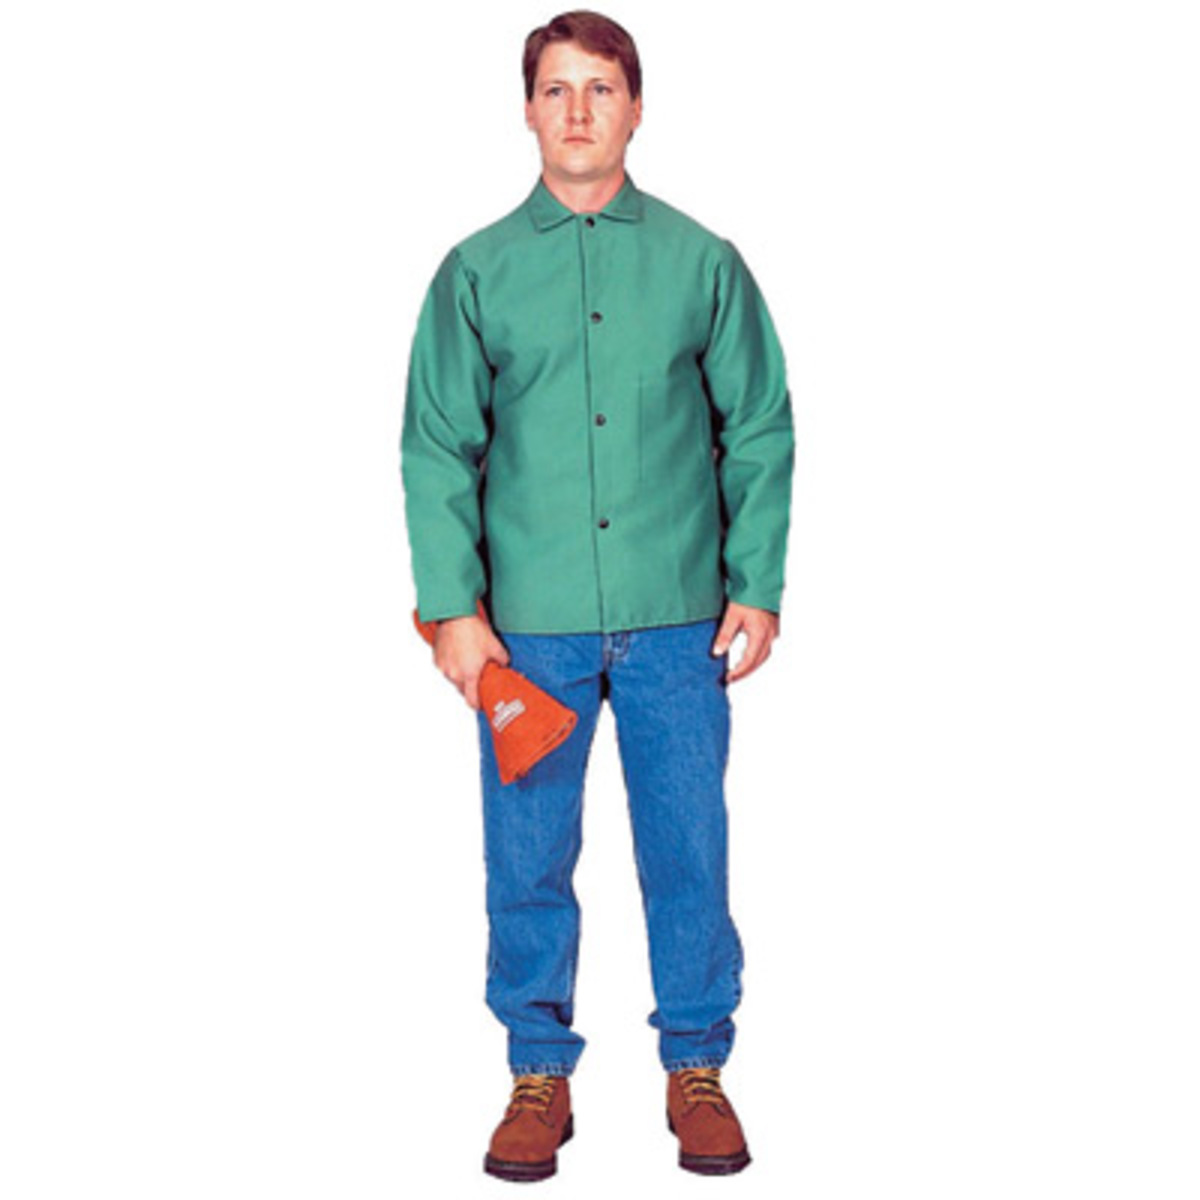 Stanco Safety Products™ Size 5X Green Cotton Flame Resistant Welding Jacket With Snap Closure